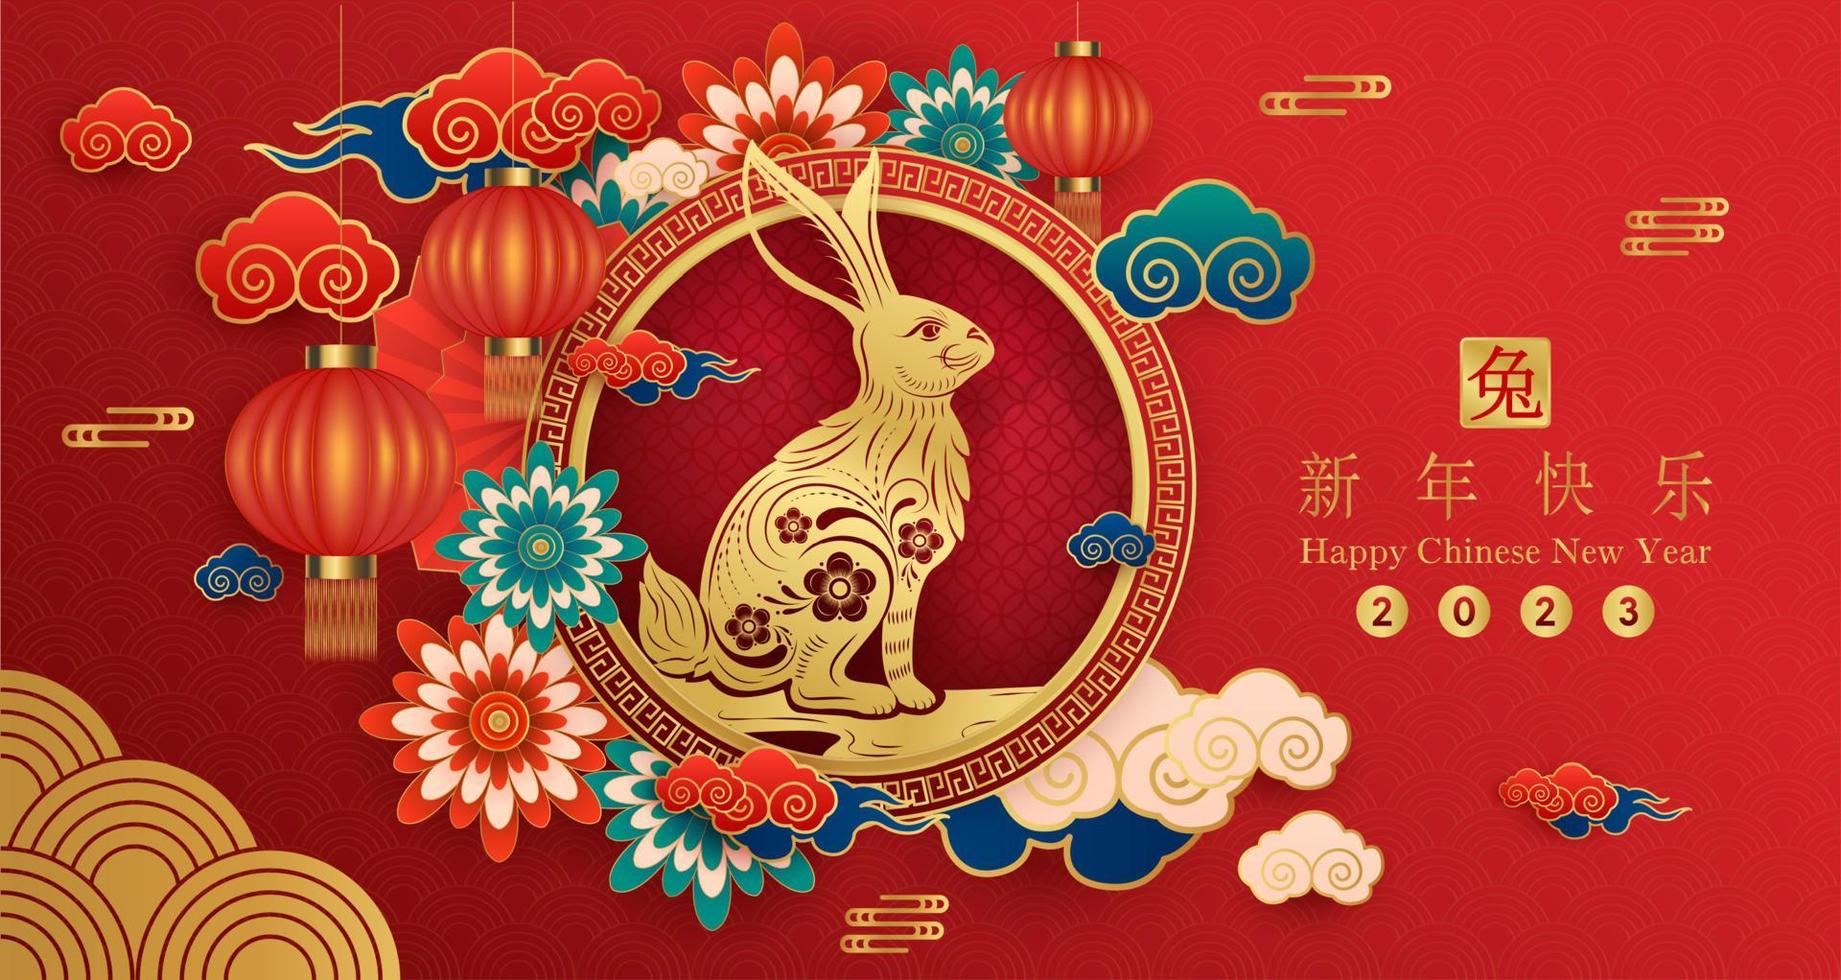 Card happy Chinese New Year Rabbit zodiac sign on red background. Asian elements with craft